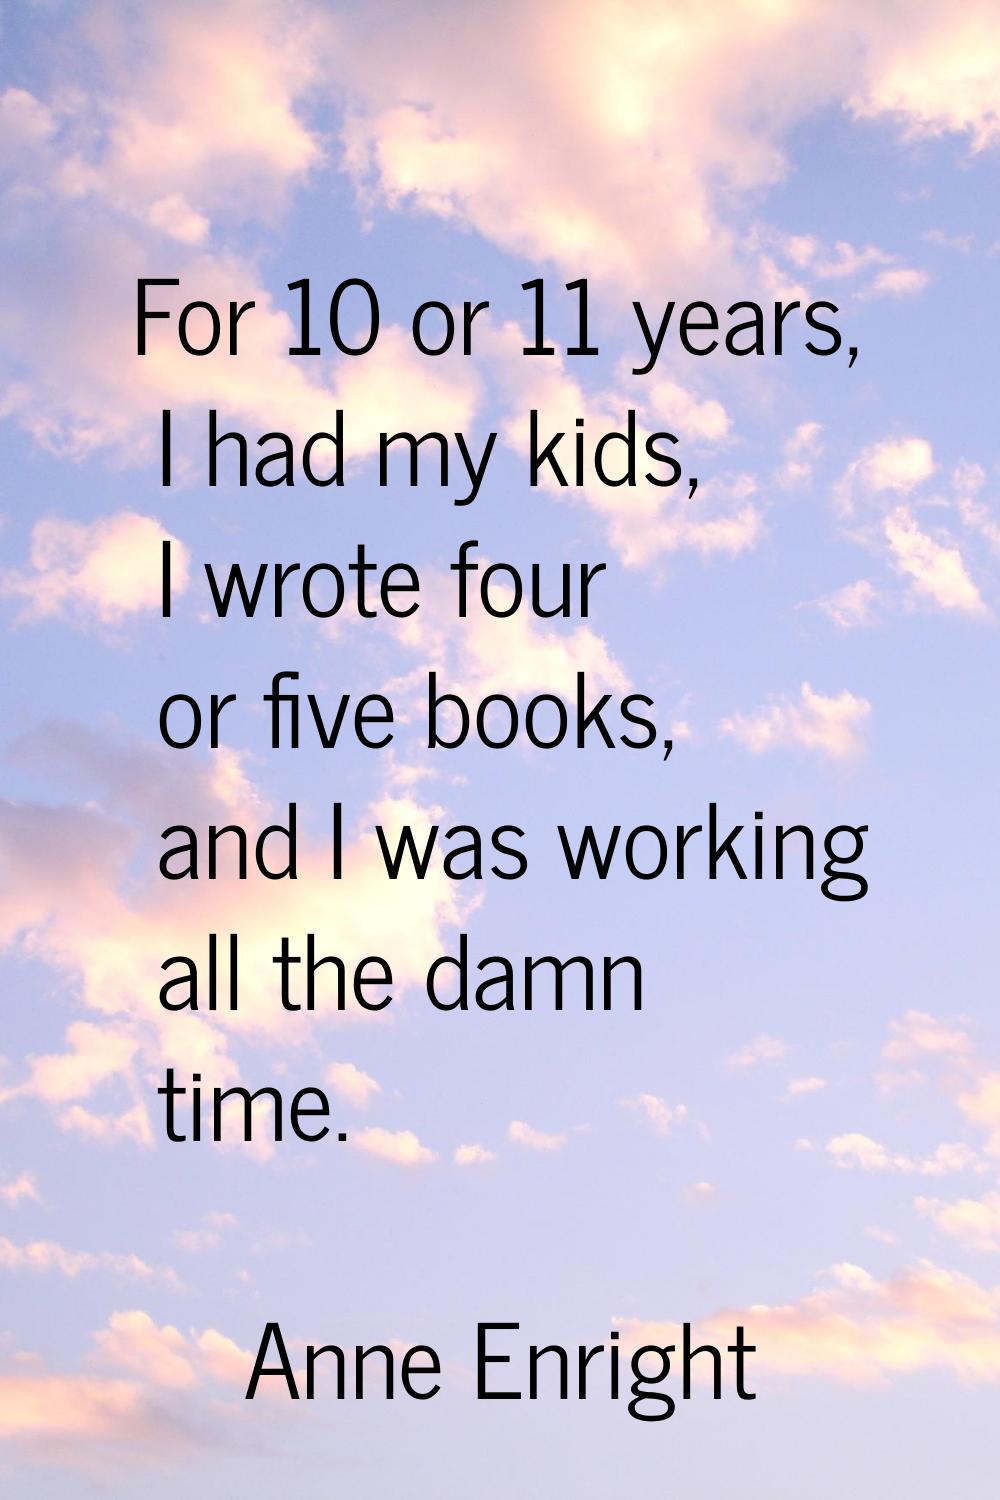 For 10 or 11 years, I had my kids, I wrote four or five books, and I was working all the damn time.